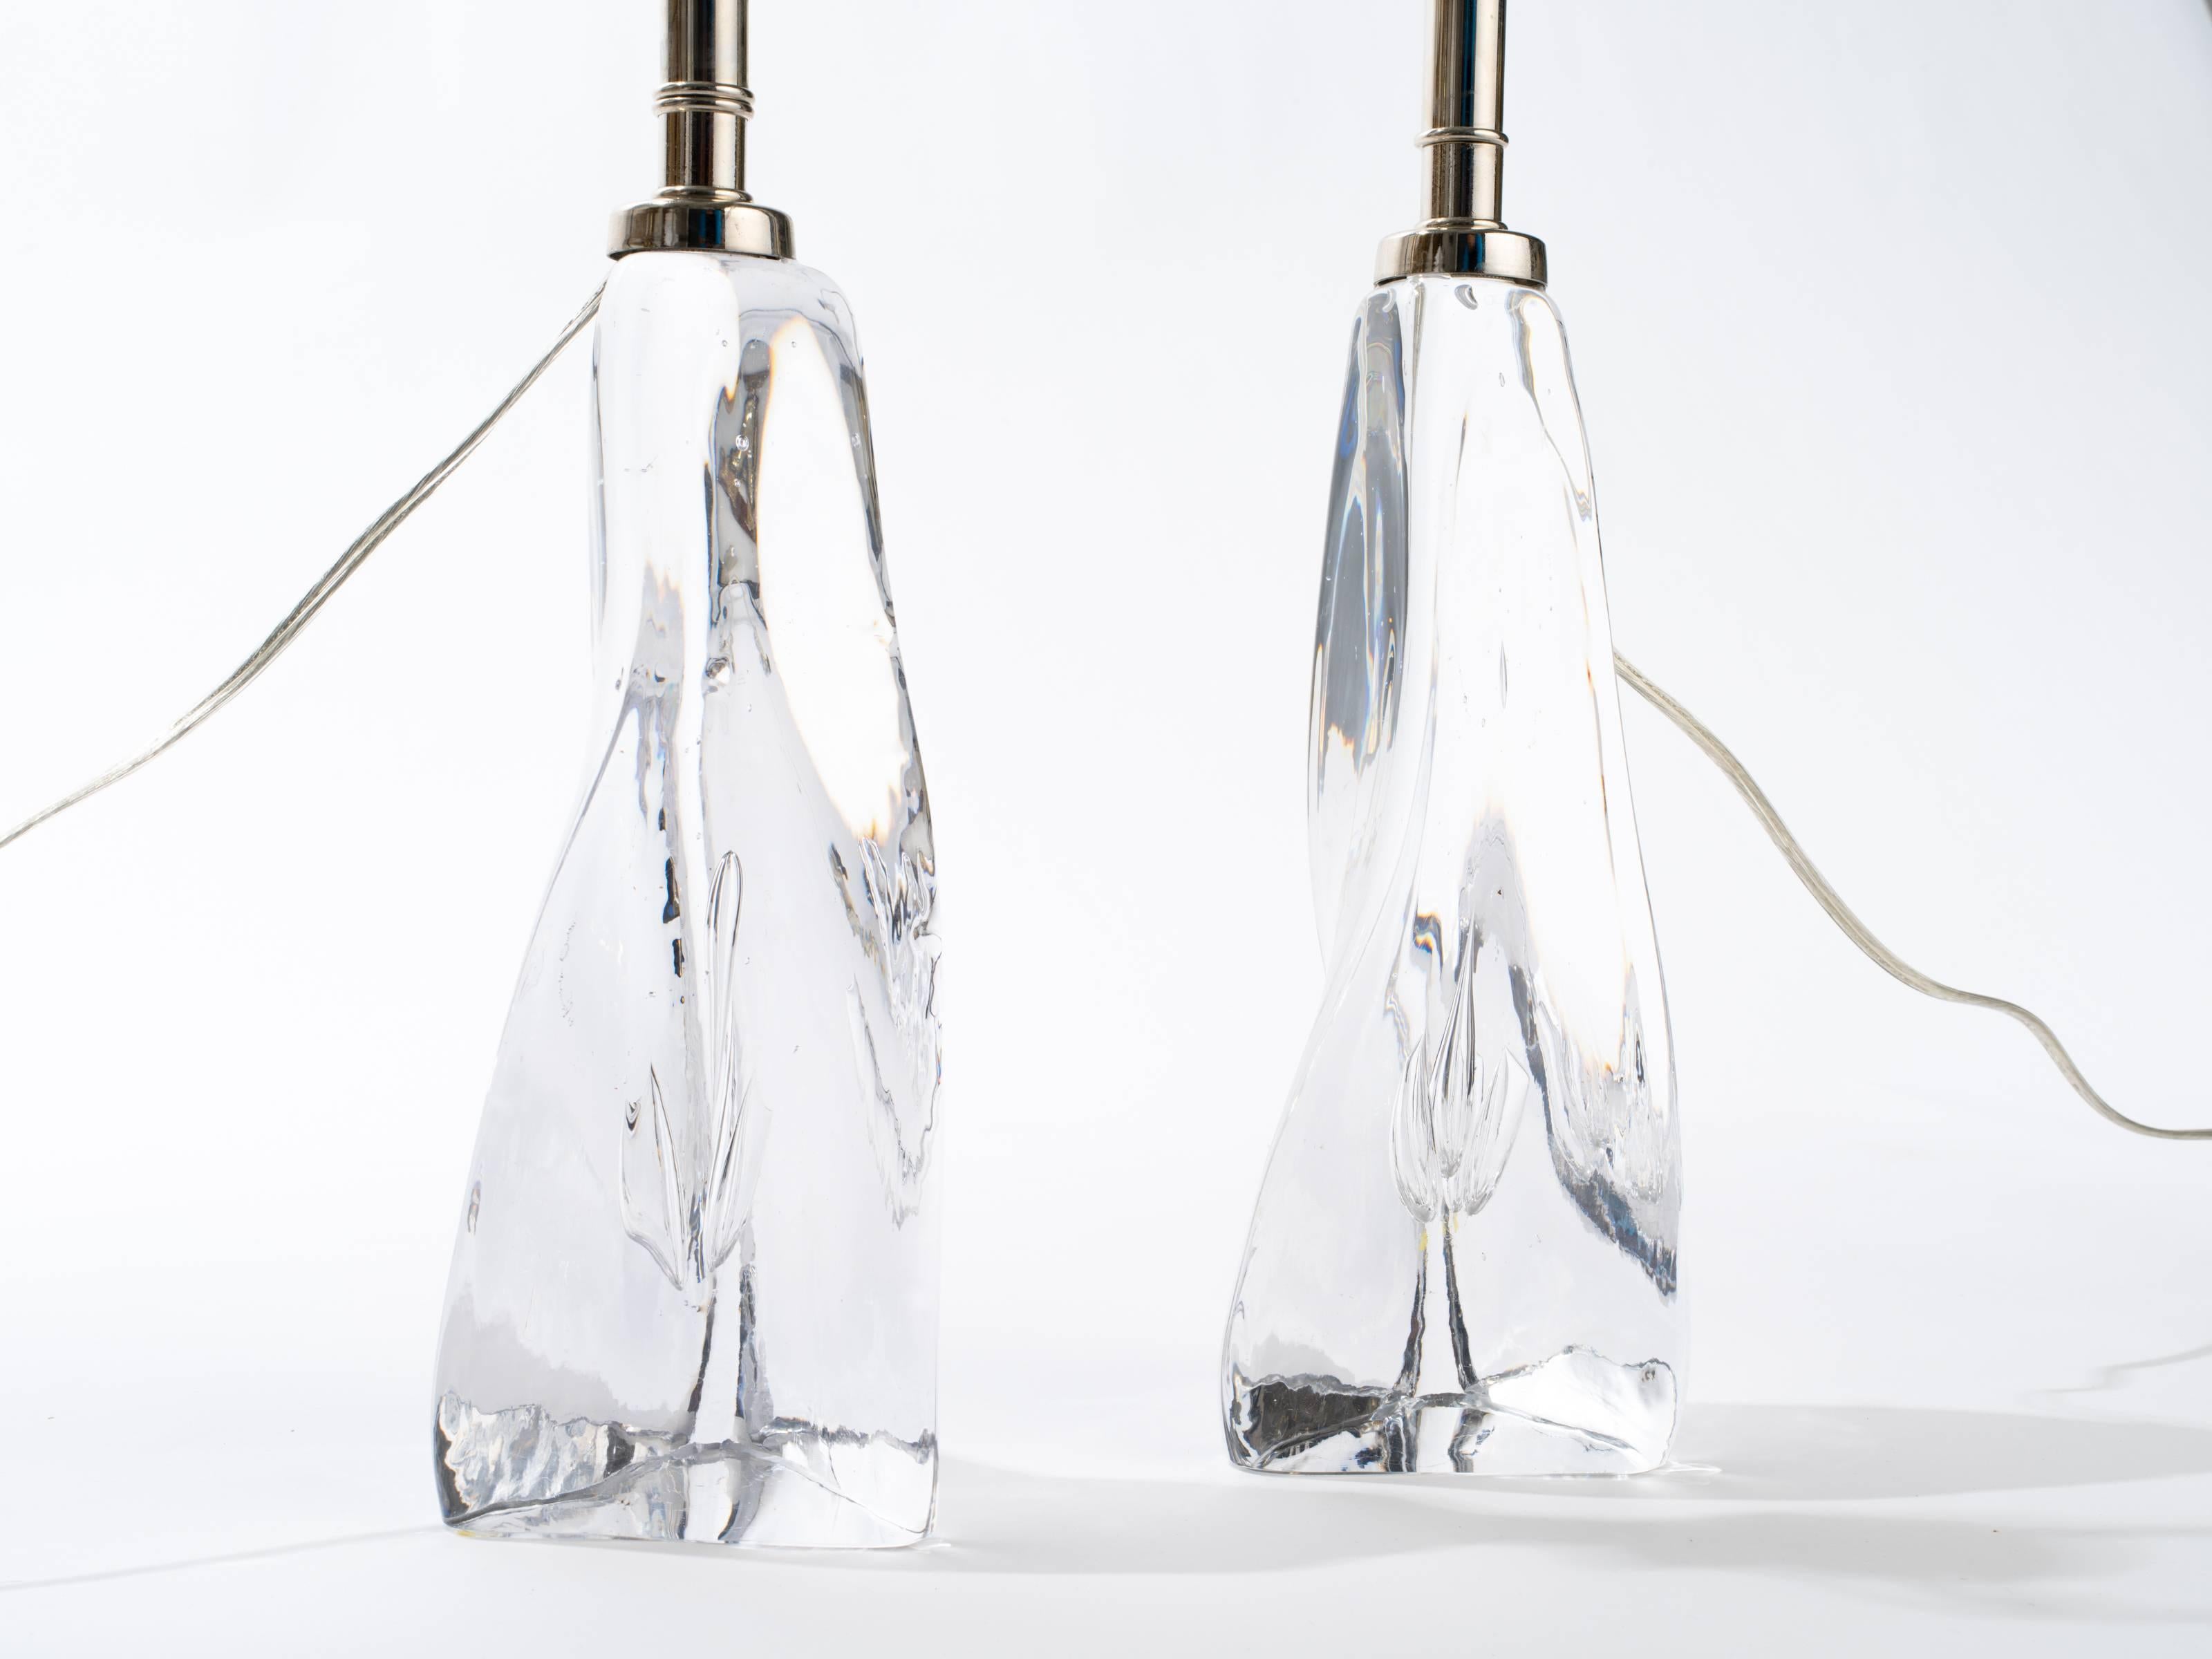 Exquisite art glass table lamps.
The glass on each lamp is handblown, not molded. Each lamp is absolutely unique.
Probably by Orrefors, Sweden, circa 1950s
New polished nickel hardware and wiring.